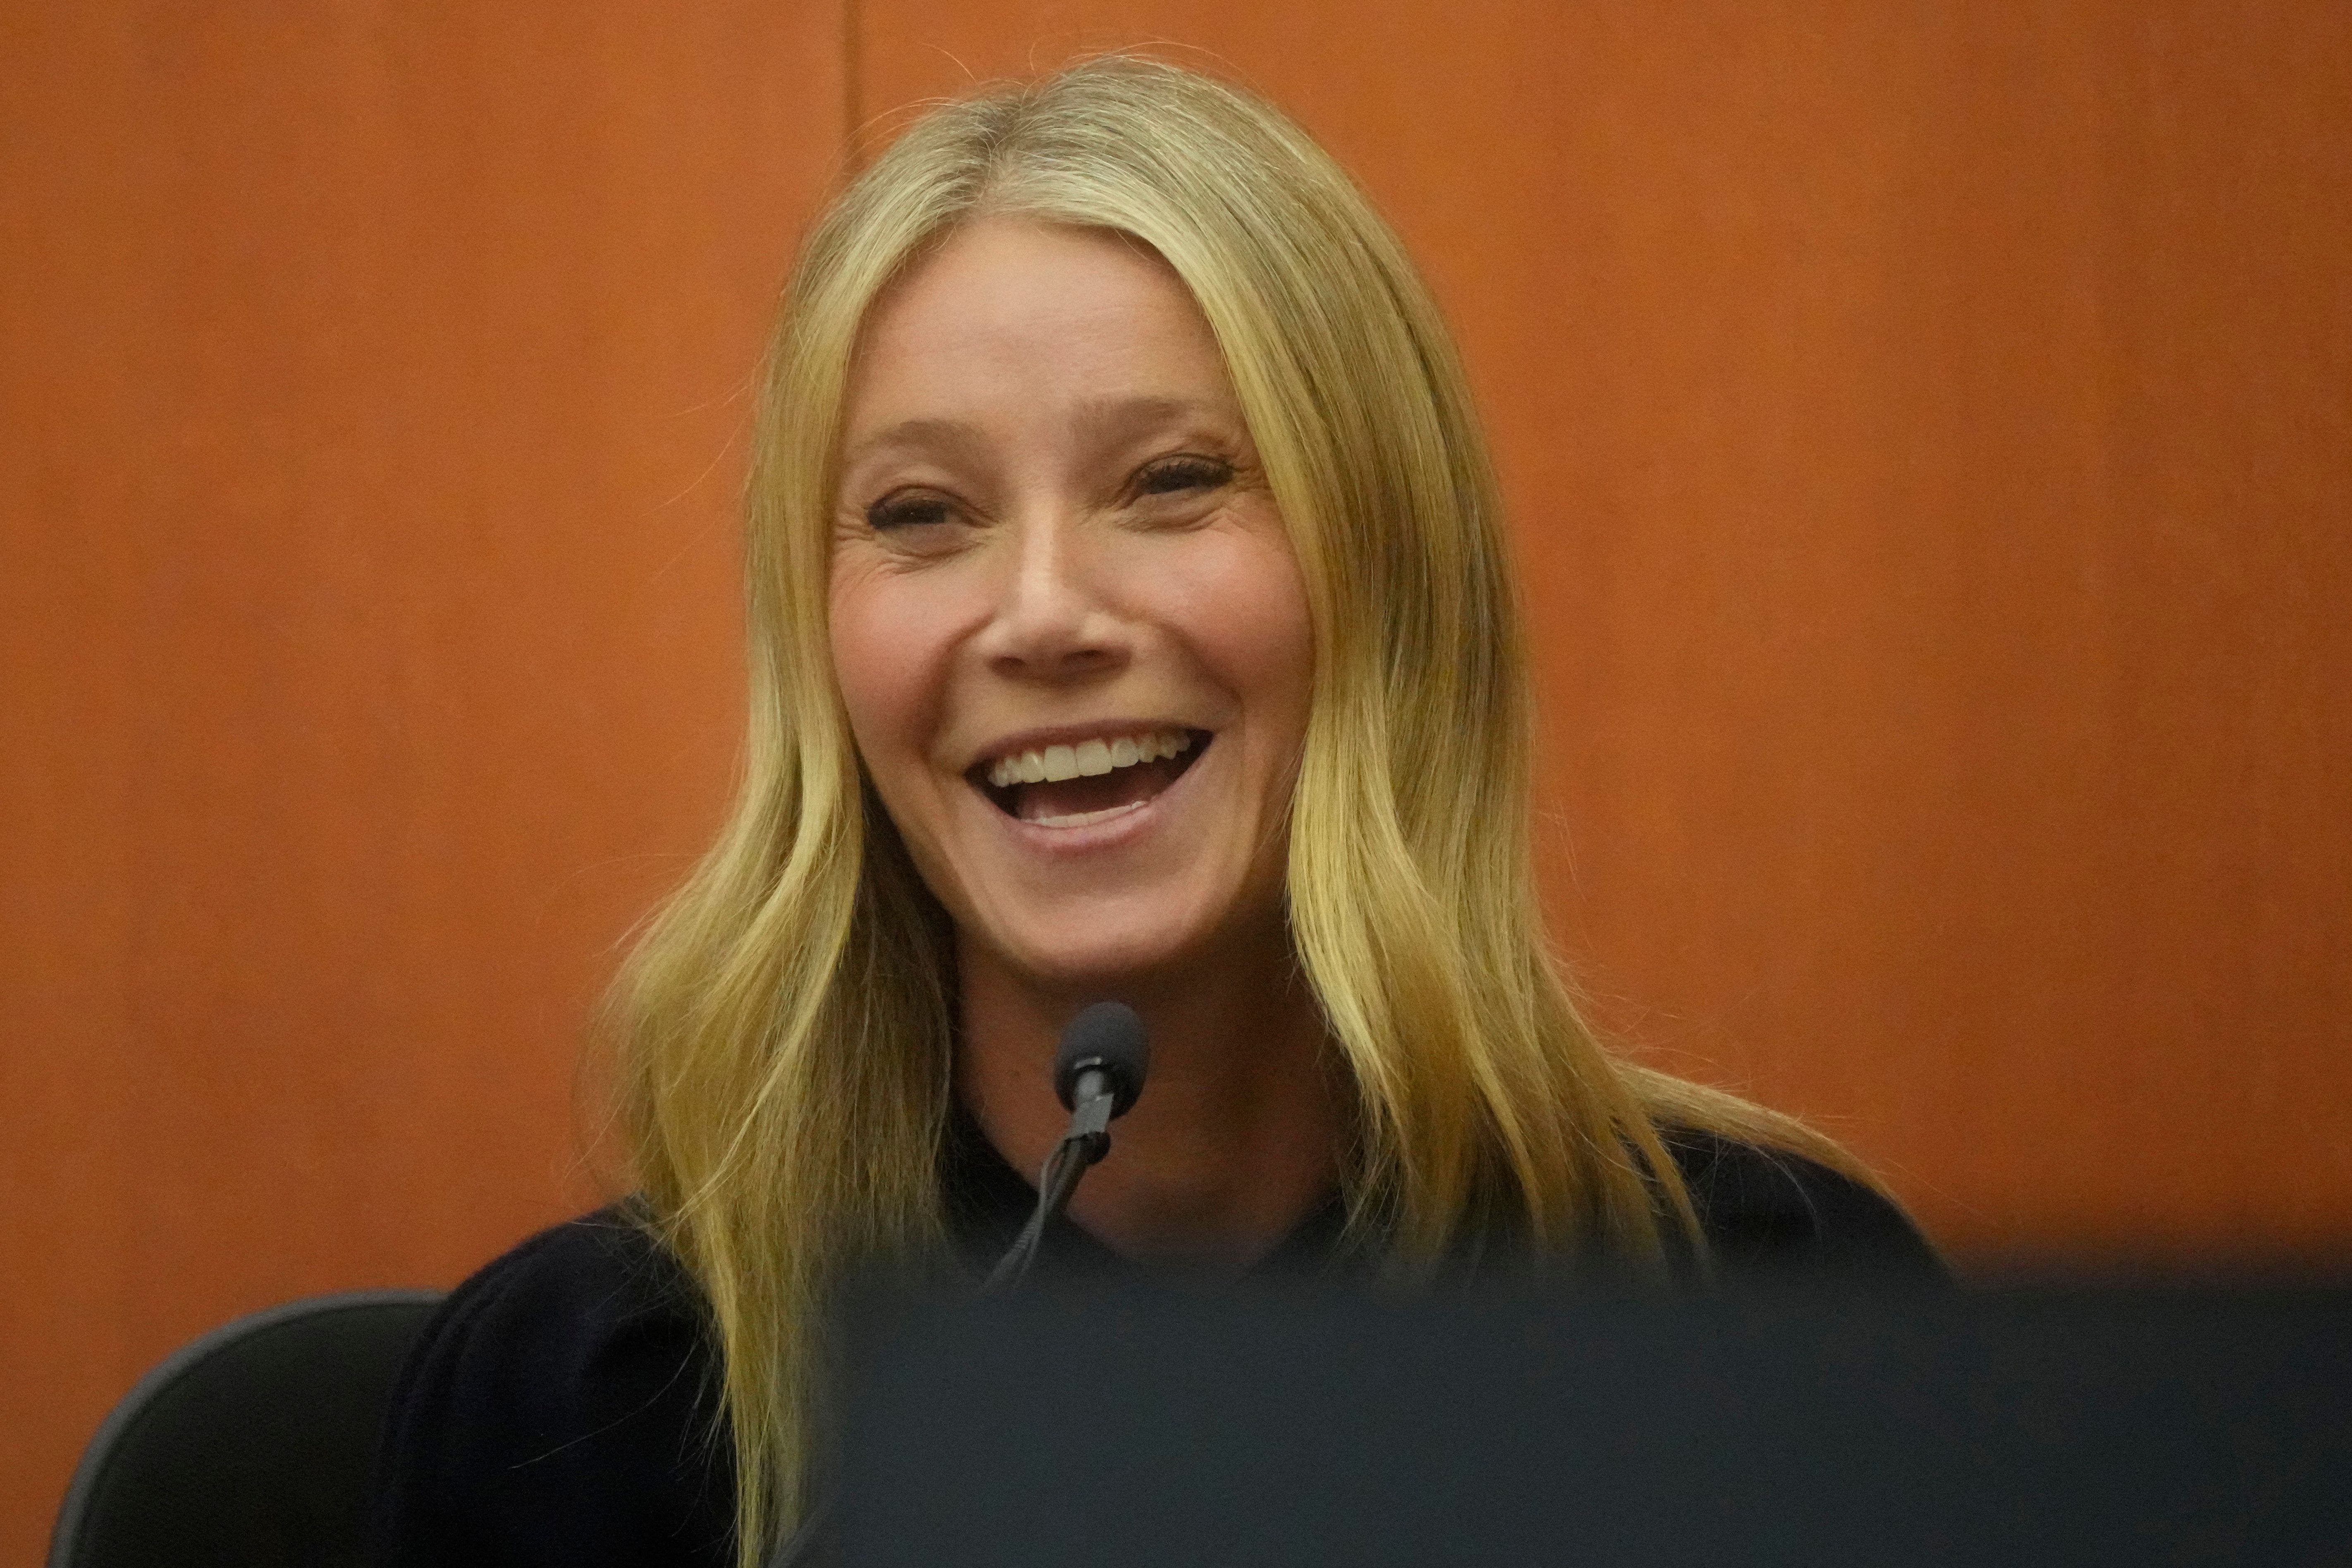 Gwyneth Paltrow reflects on ski crash trial for the first time